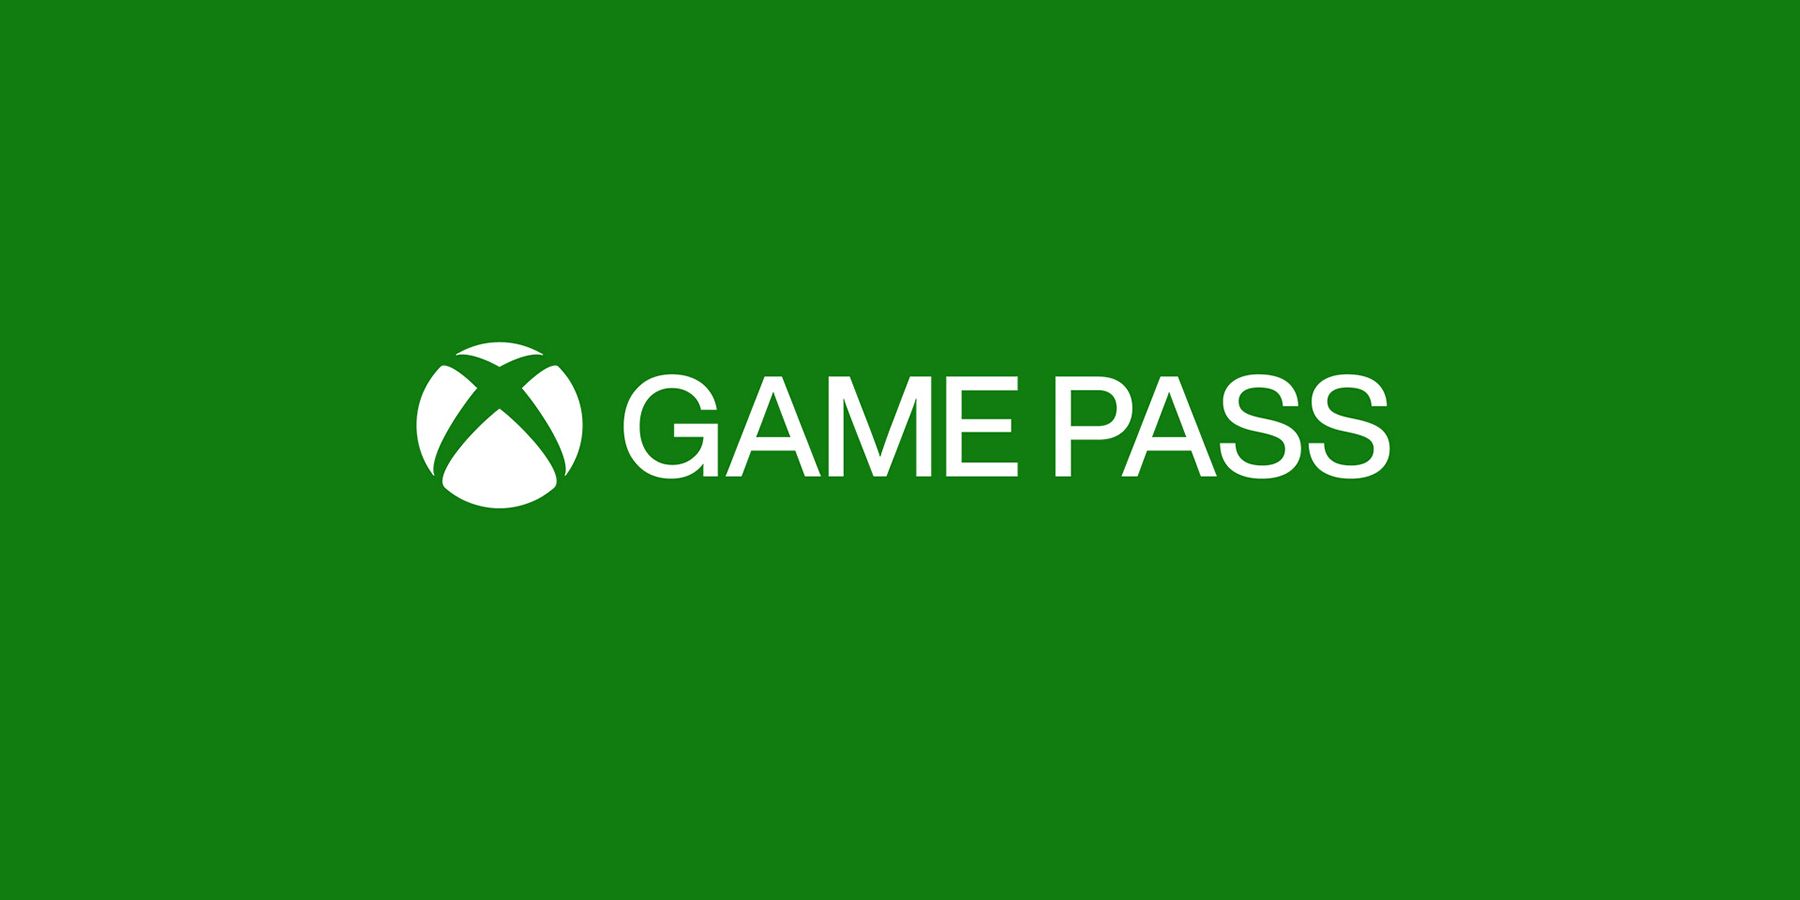 game pass logo on green background